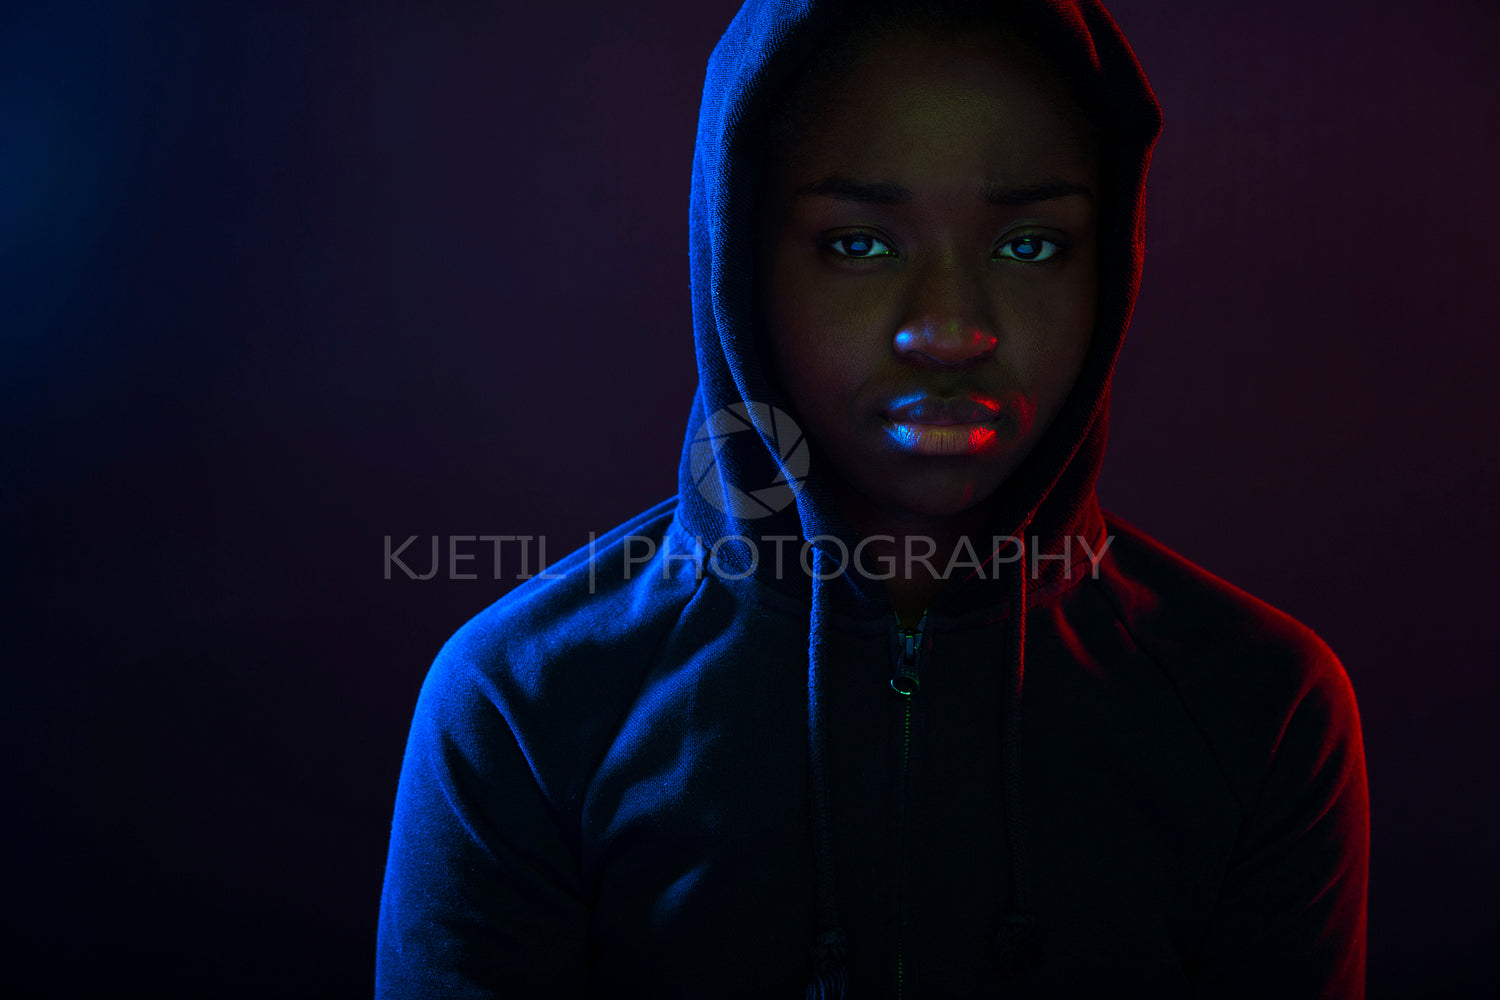 Colorful portrait of a cool woman with dark skin wearing hoodie